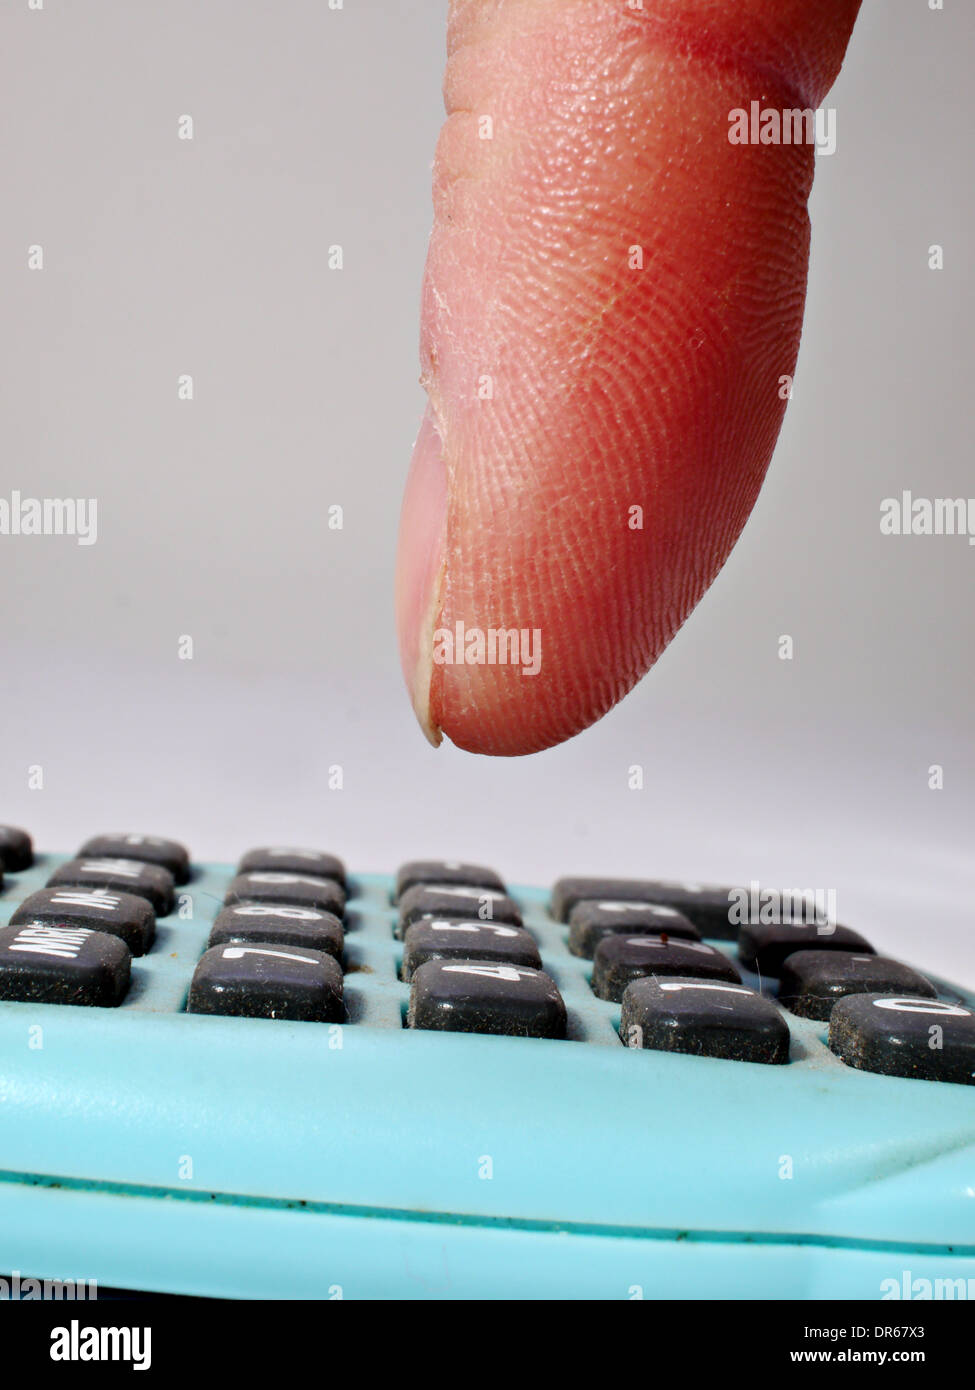 A finger is about to push a button on a small calculator Stock Photo